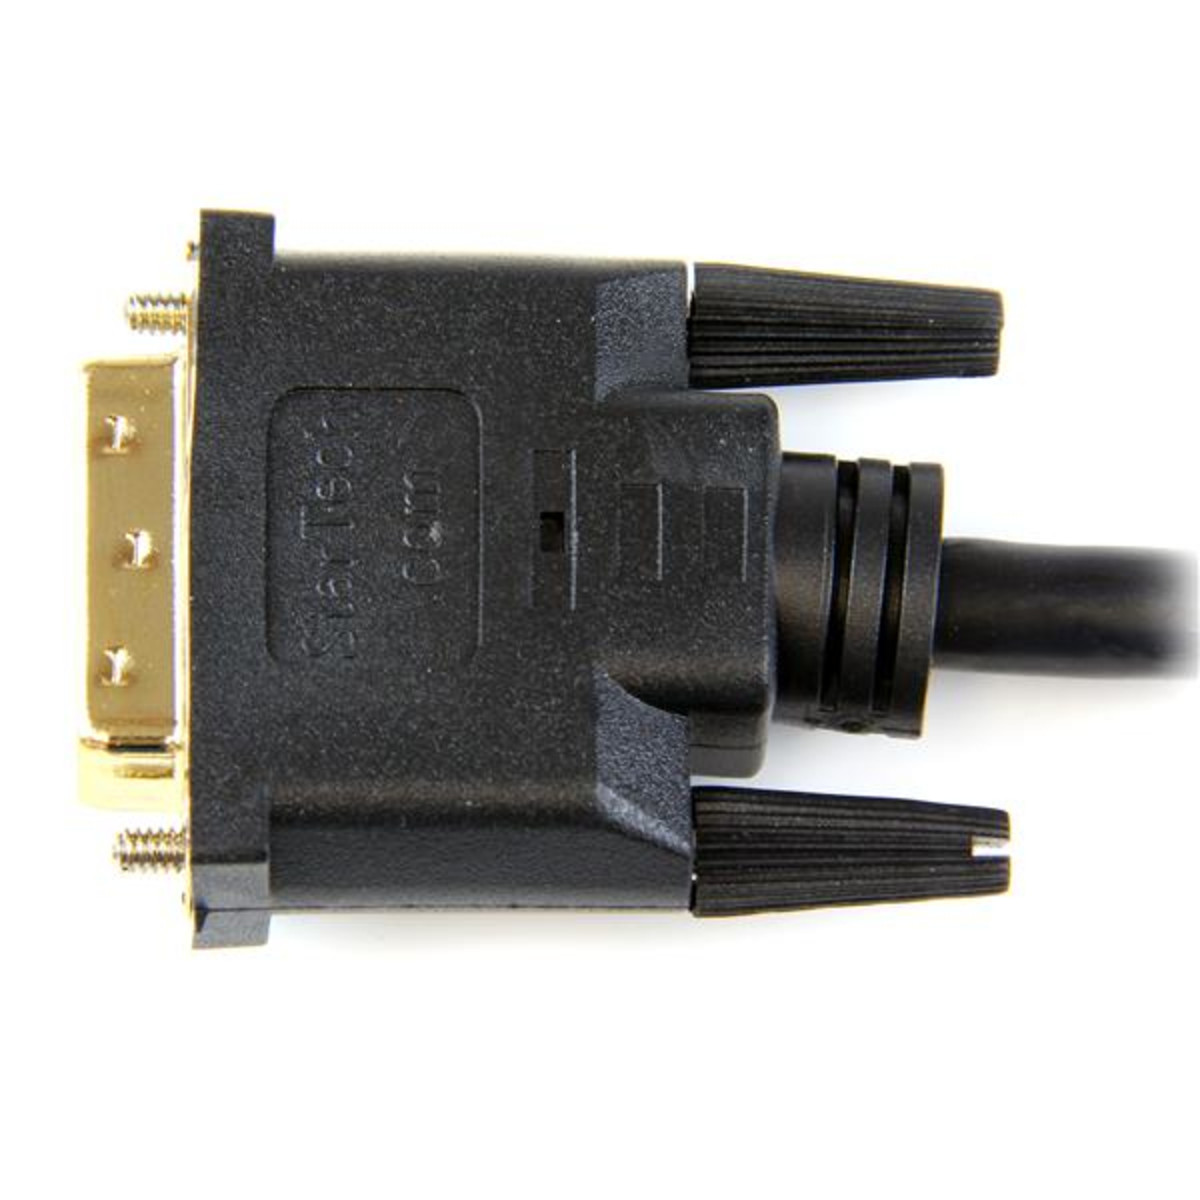 3m HDMI to DVI-D Cable - M/M